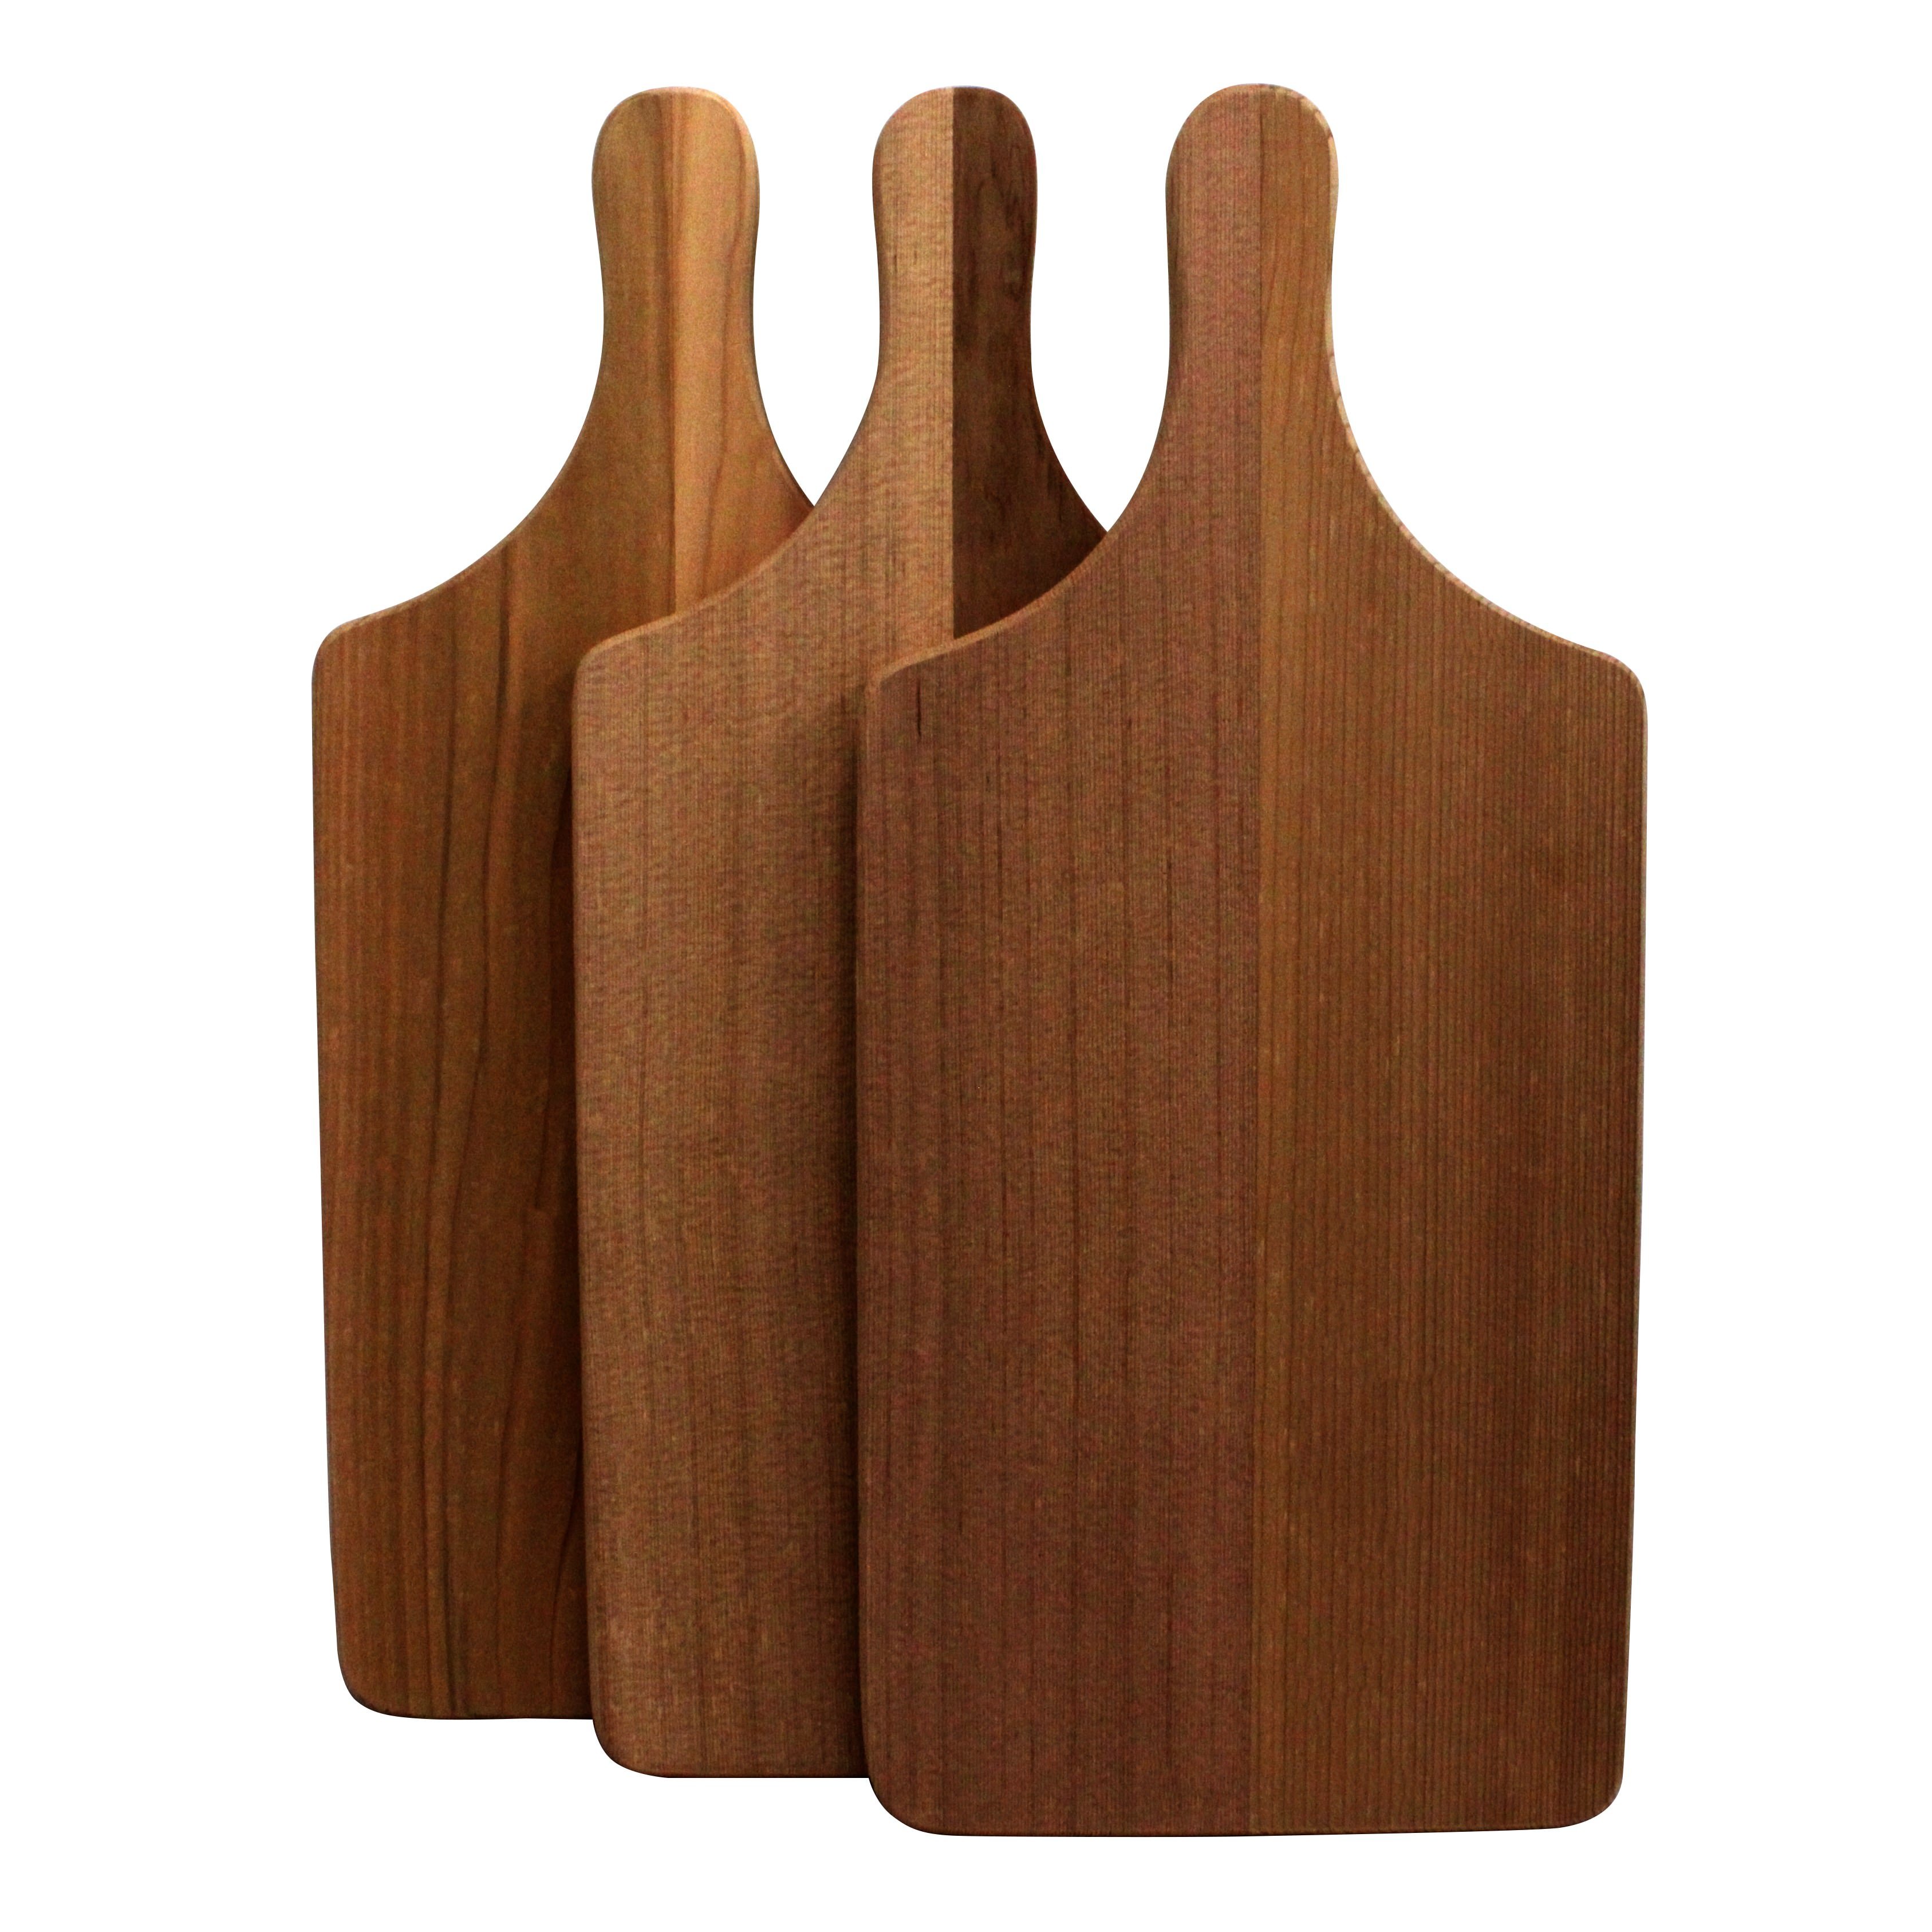 https://www.cedartubs.com/images/products/storeproducts/CuttingBoard2.jpg